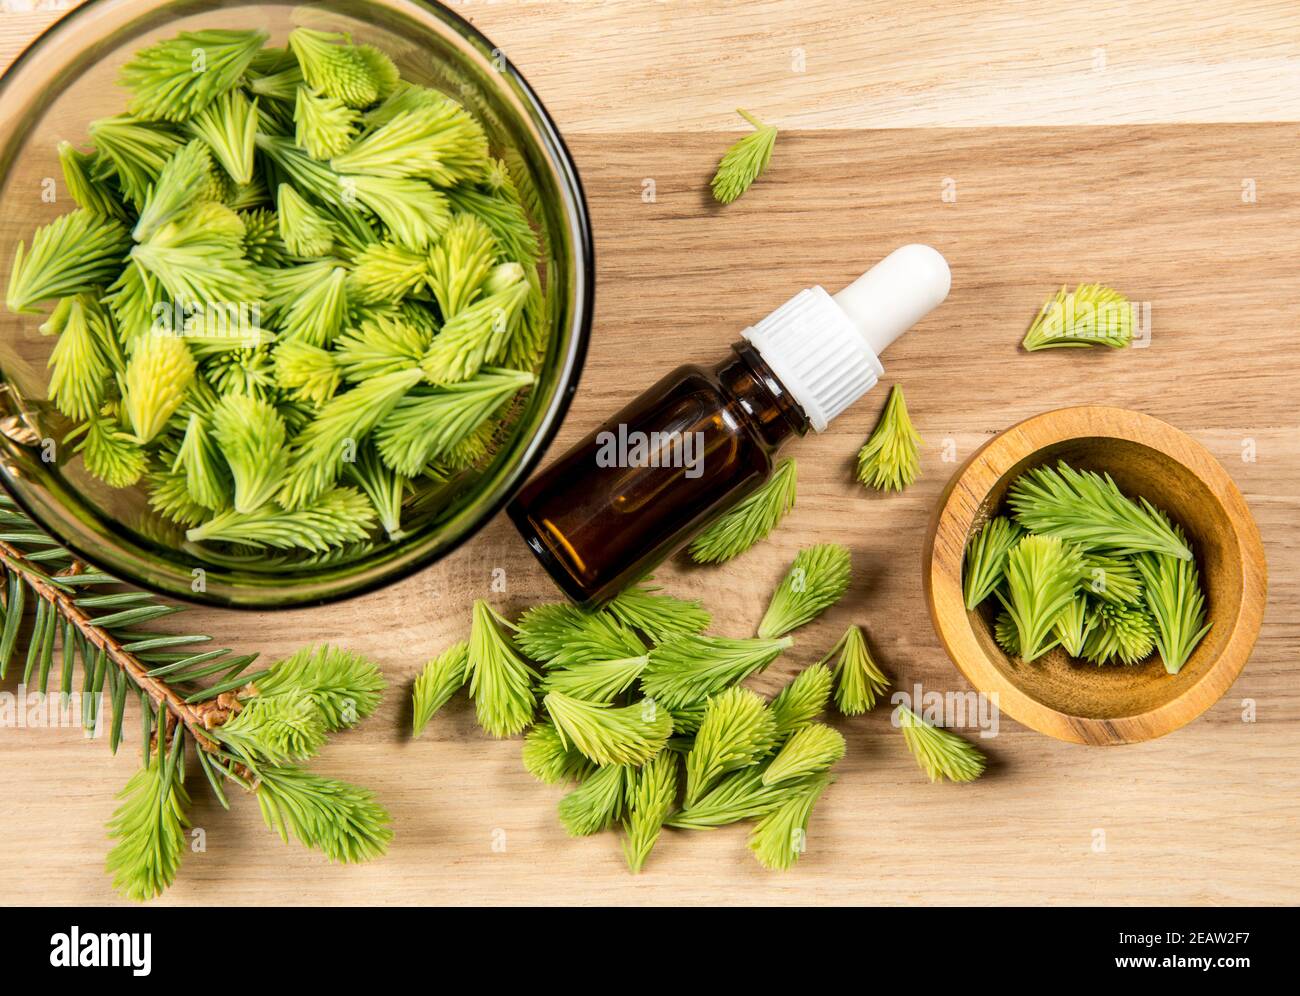 Small glass pipette bottle with spruce tree shoot oil tincture concept, fresh green spruce needle shoots tips on wooden background in bowl. Studio. Stock Photo